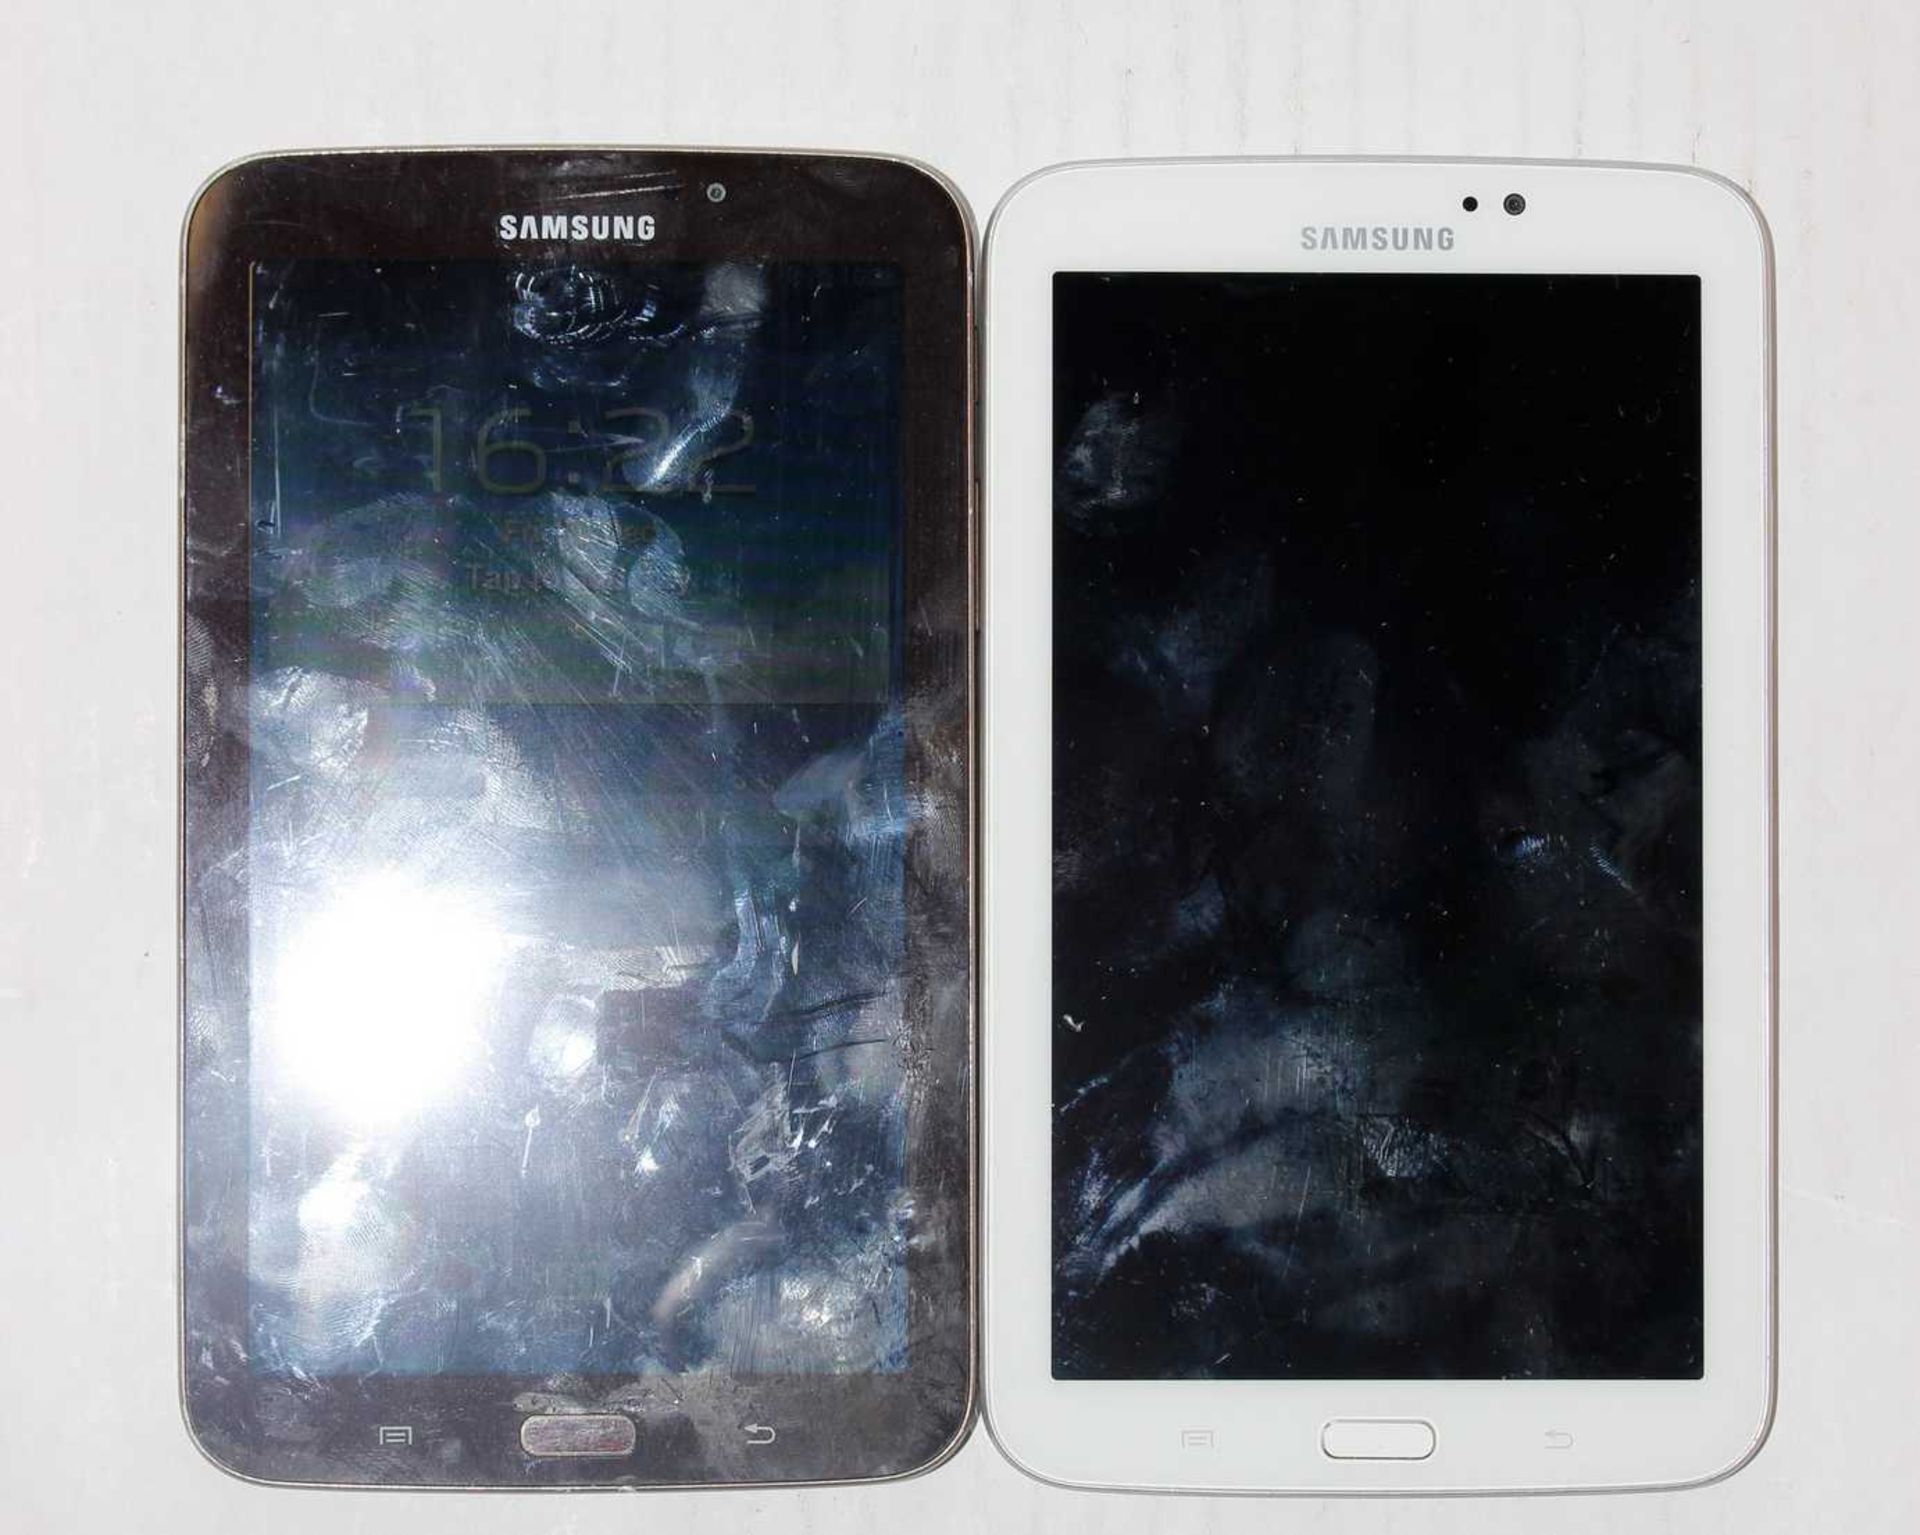 Two pre-owned Samsung Galaxy Tab 3 SM-T210 8GB Wi-Fi 7" in White/Brown (FRP clear).